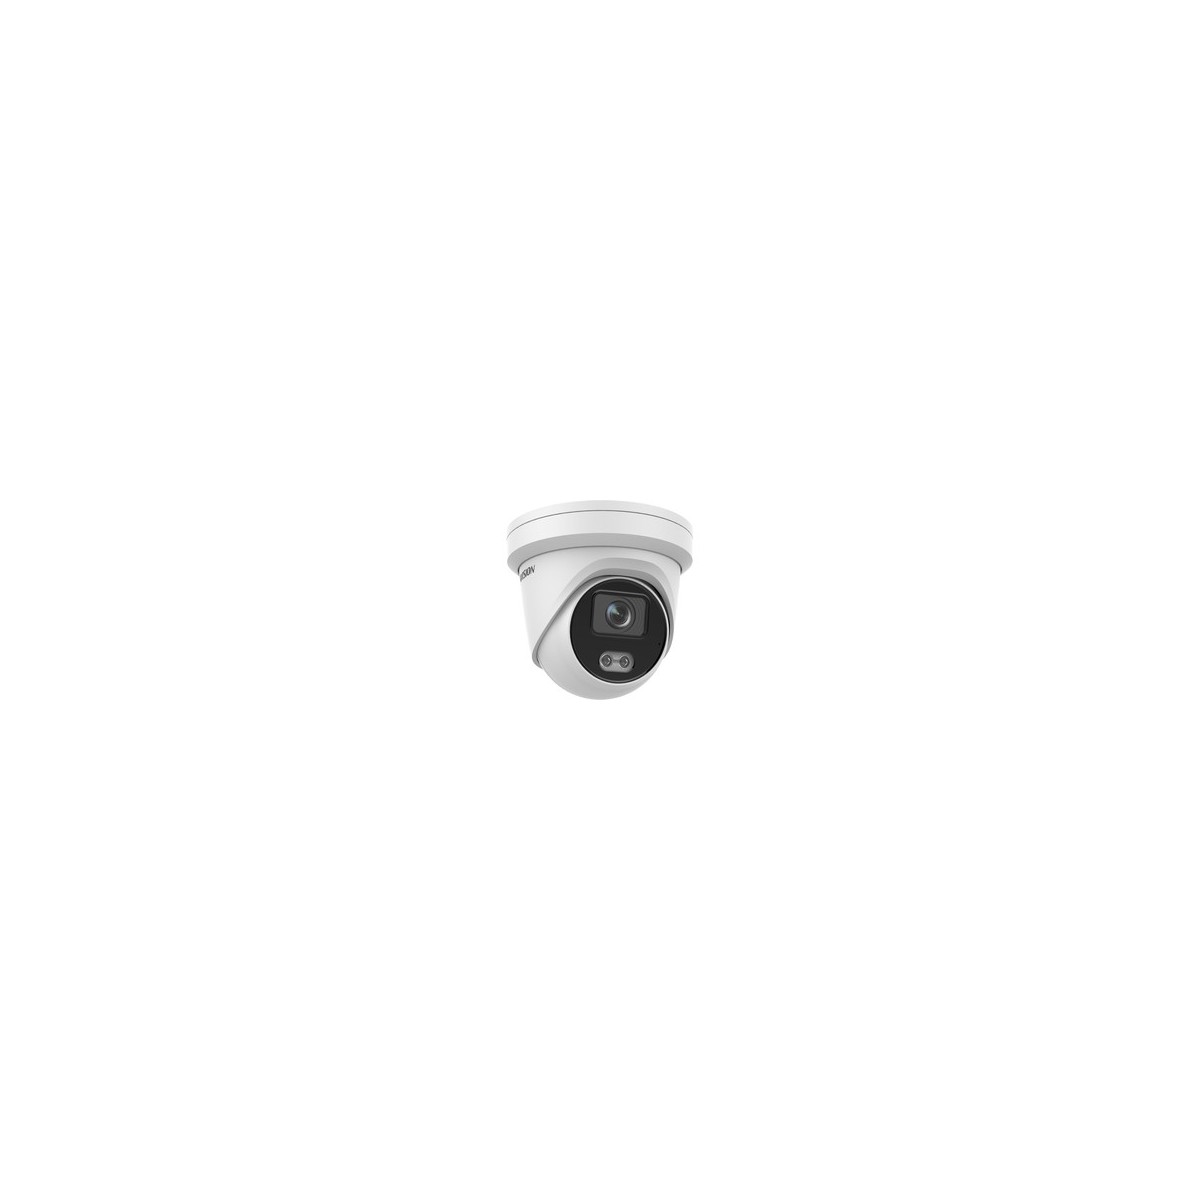 Hikvision Digital Technology DS-2CD2347G2-LU - IP security camera - Outdoor - Wired - Ceiling-wall - White - Turret